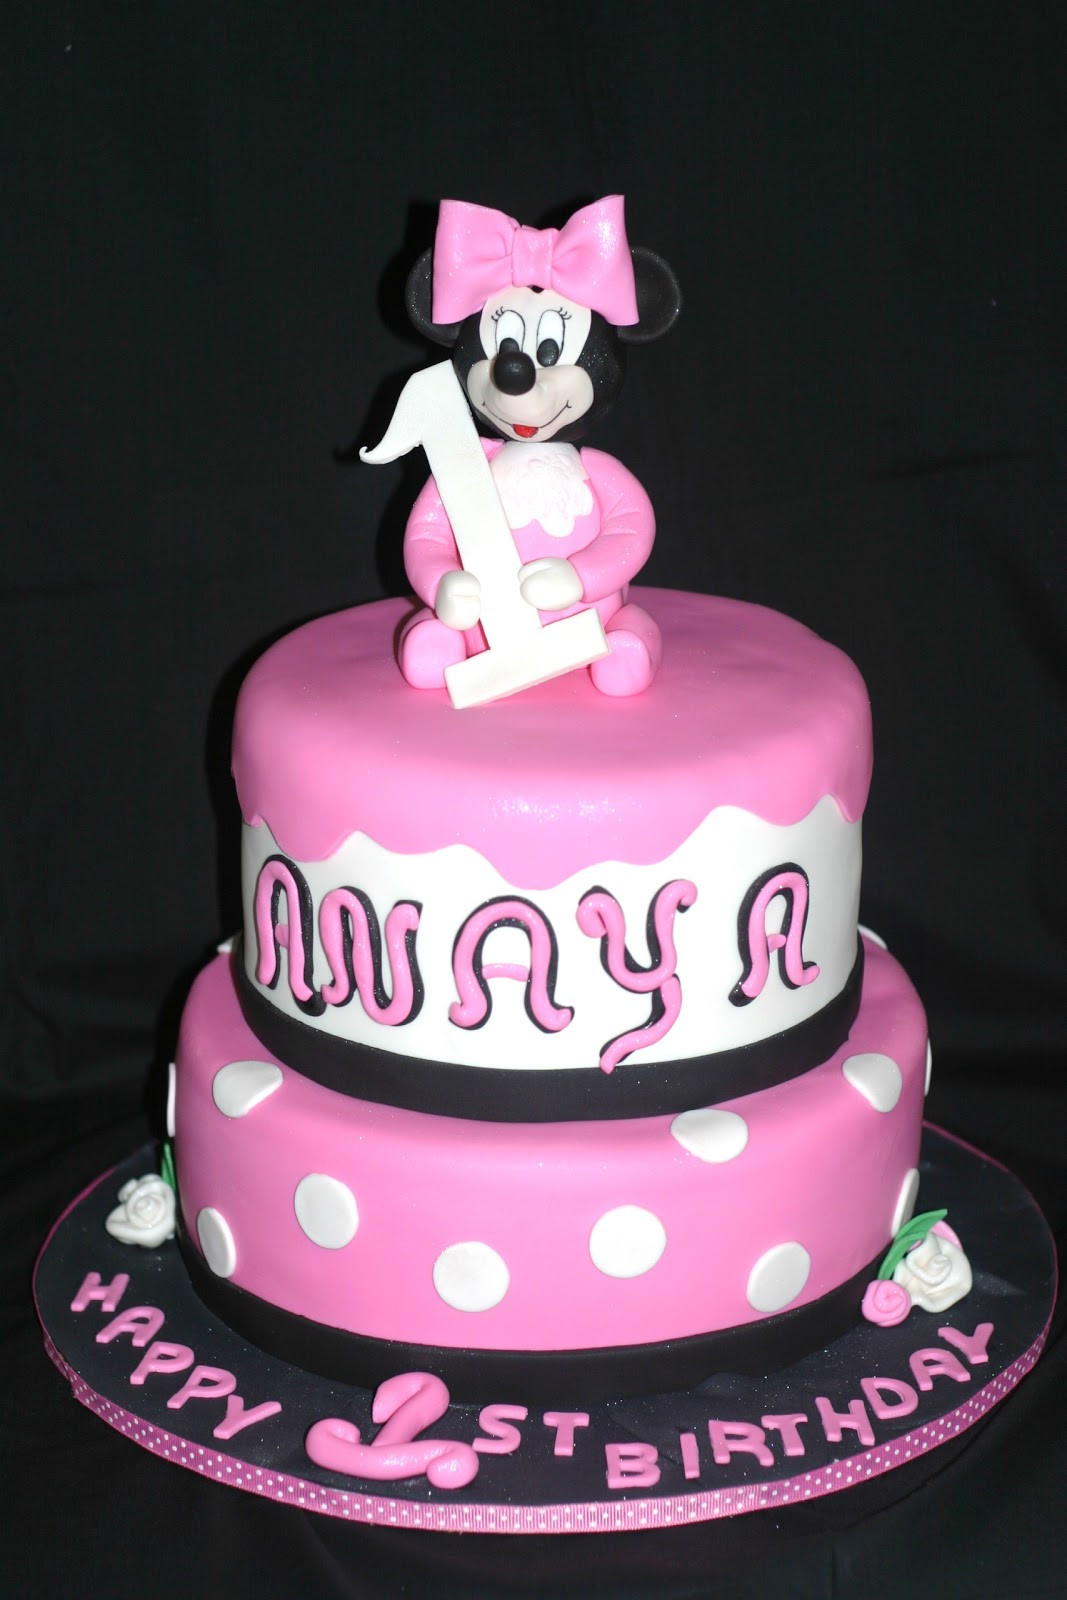 Minnie Mouse Birthday Cake
 Pink Little Cake Baby Minnie Mouse Cake